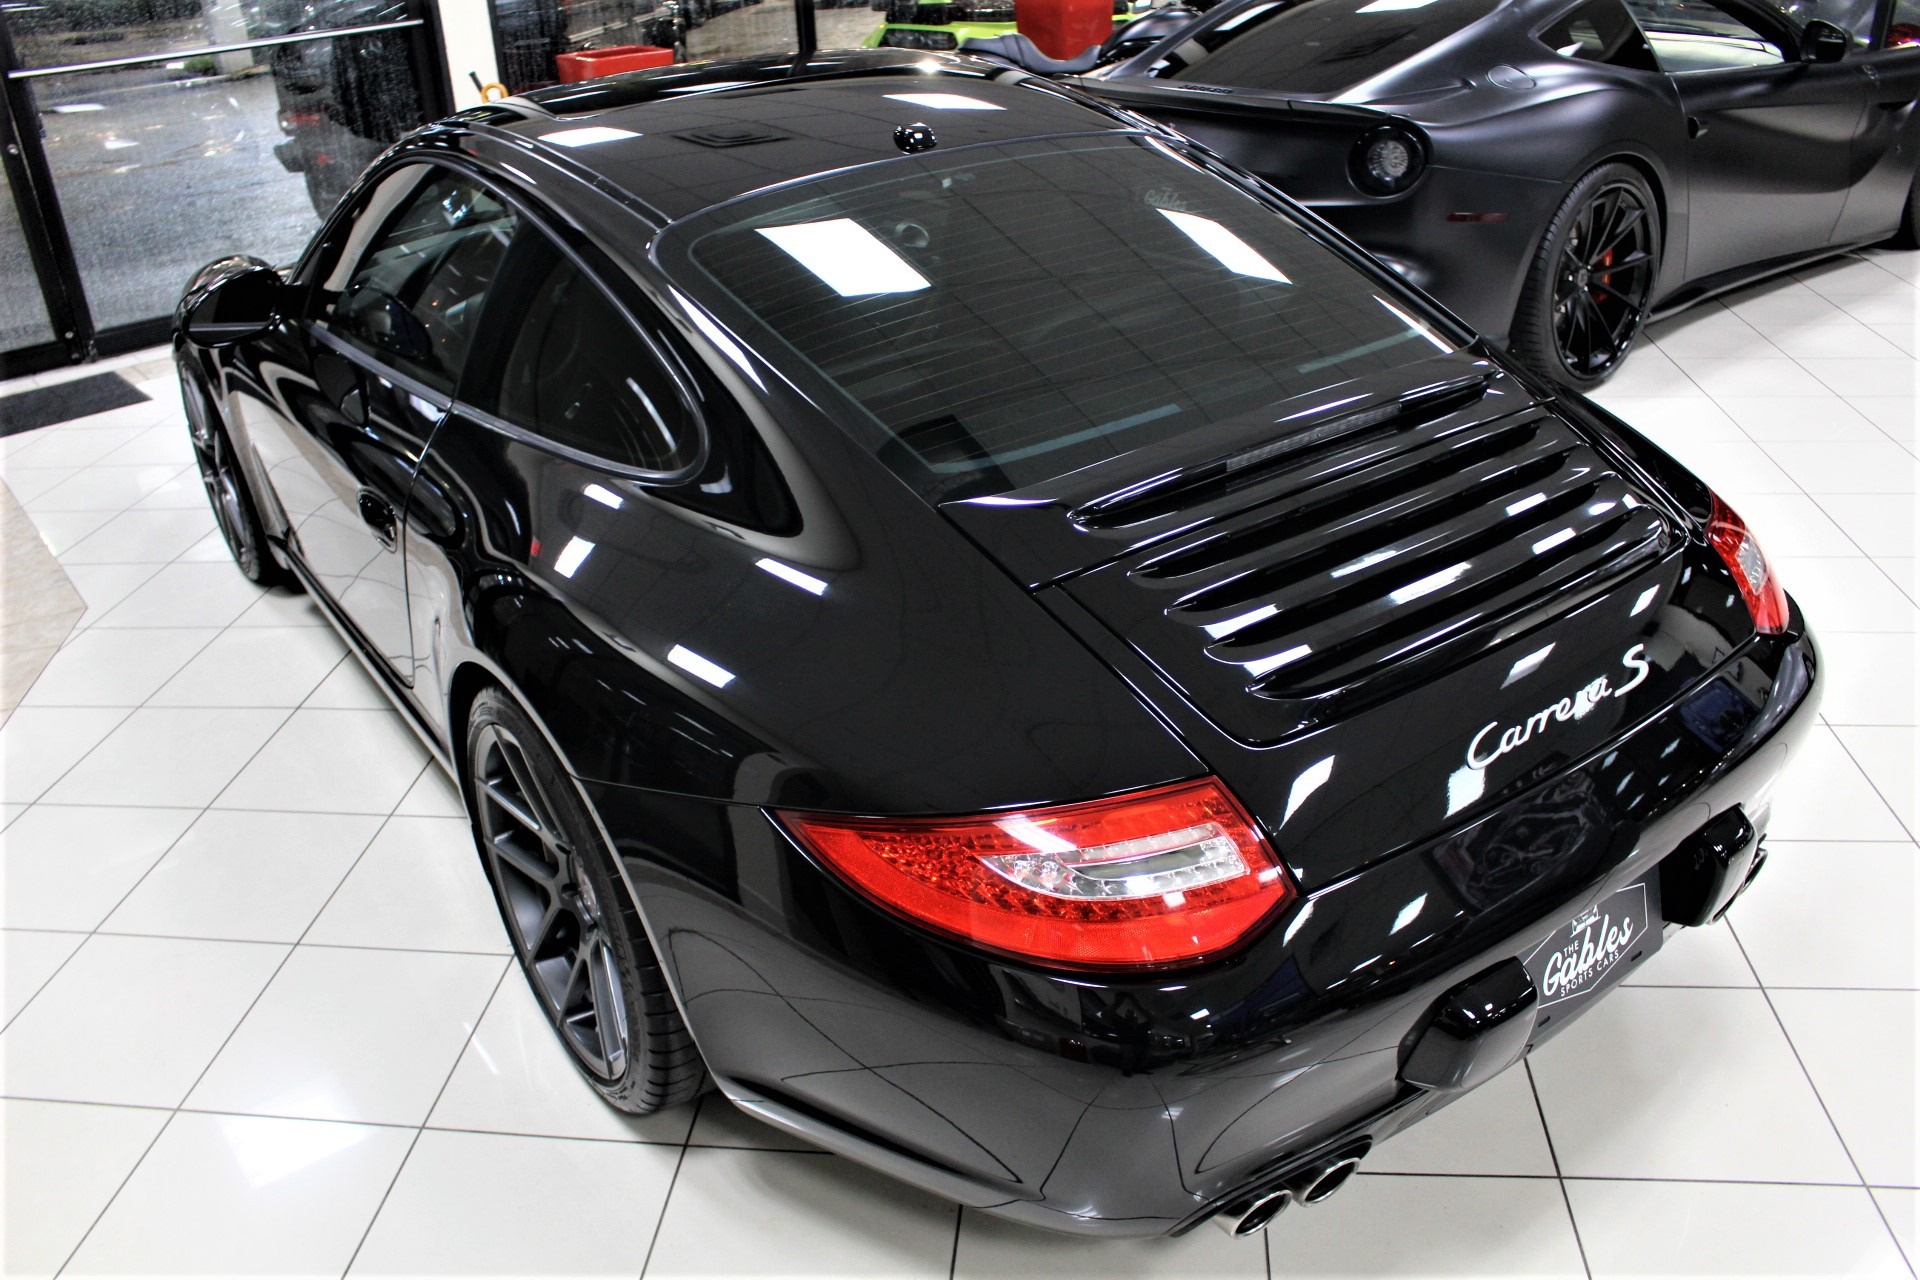 Used 2009 Porsche 911 Carrera S for sale Sold at The Gables Sports Cars in Miami FL 33146 1